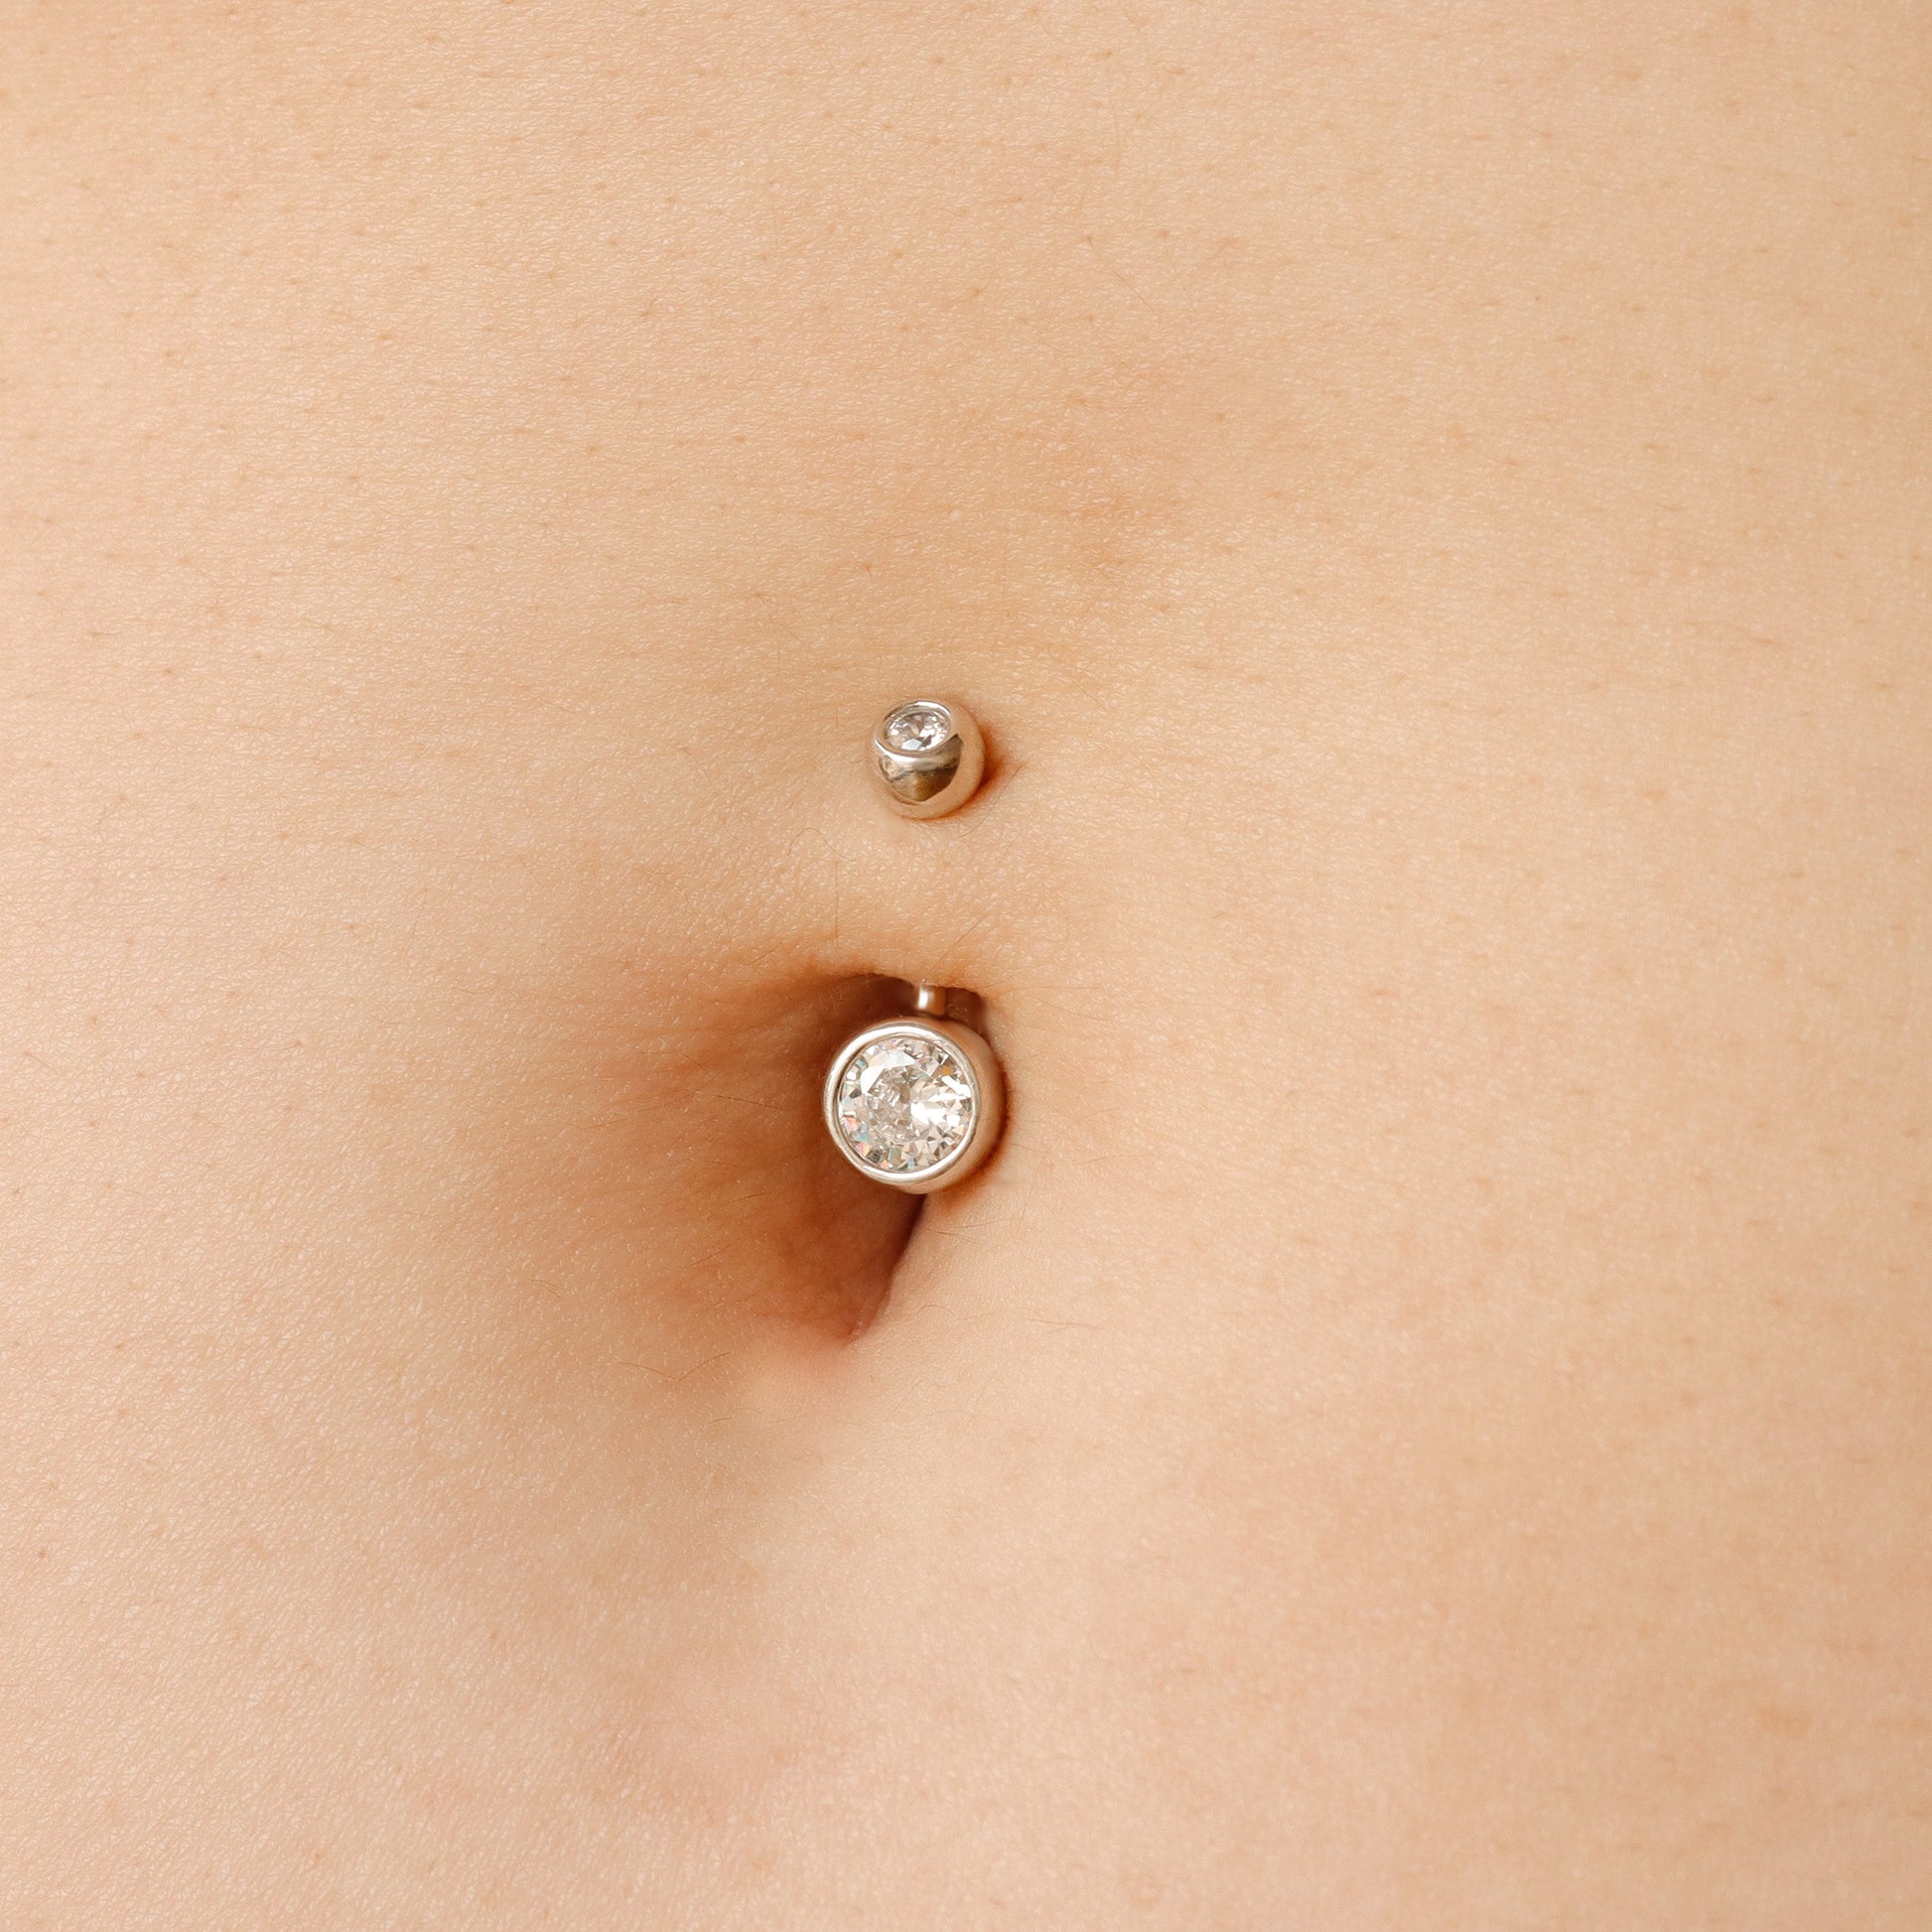 Solid 925 Silver | 16G/14G Double Jeweled Belly Ring | 6mm 1/4" 8mm 5/16" 10mm 3/8" - Sturdy South